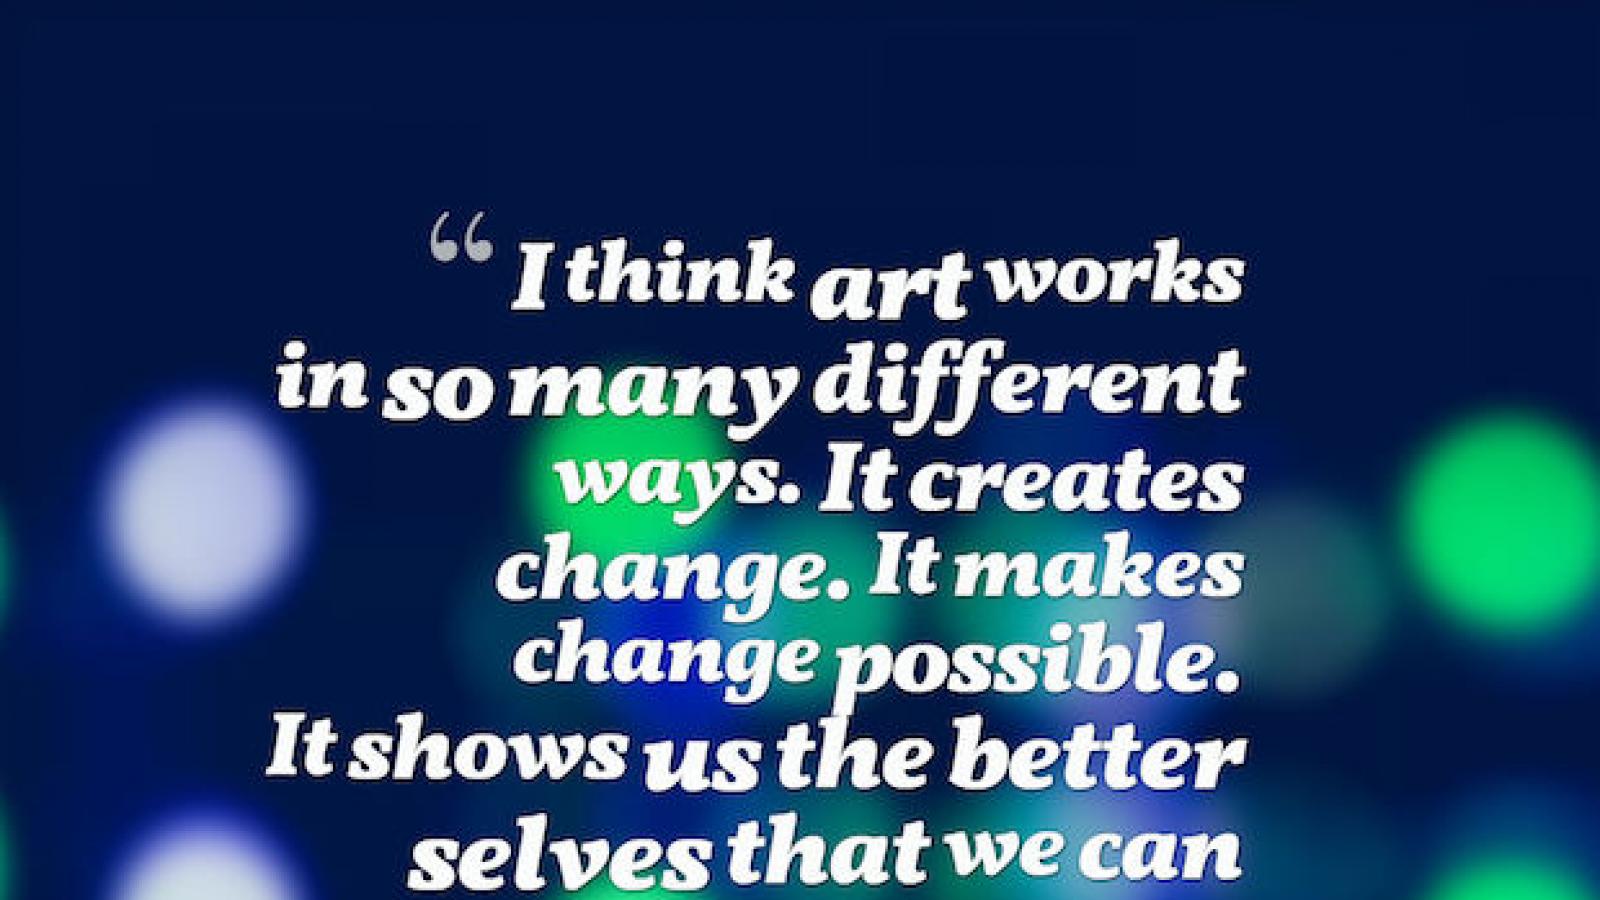 quote by Roxane Gay that says art creates change and makes us our better selves